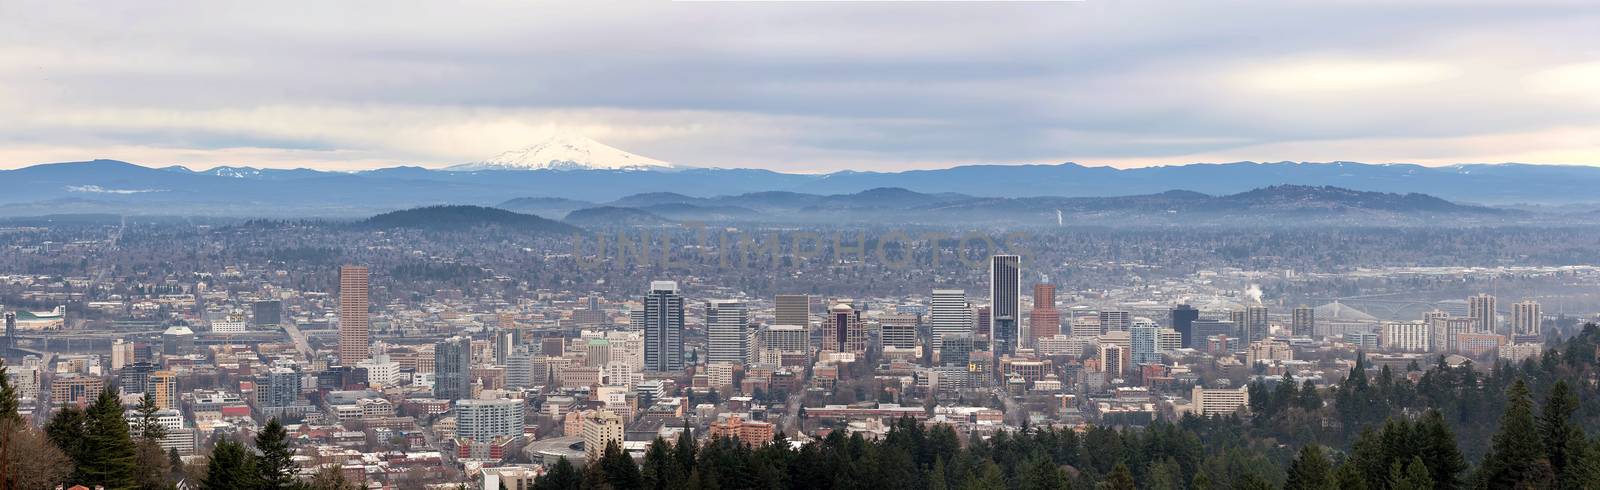 Portland Oregon downtown cityscape with Mount Hood Panorama